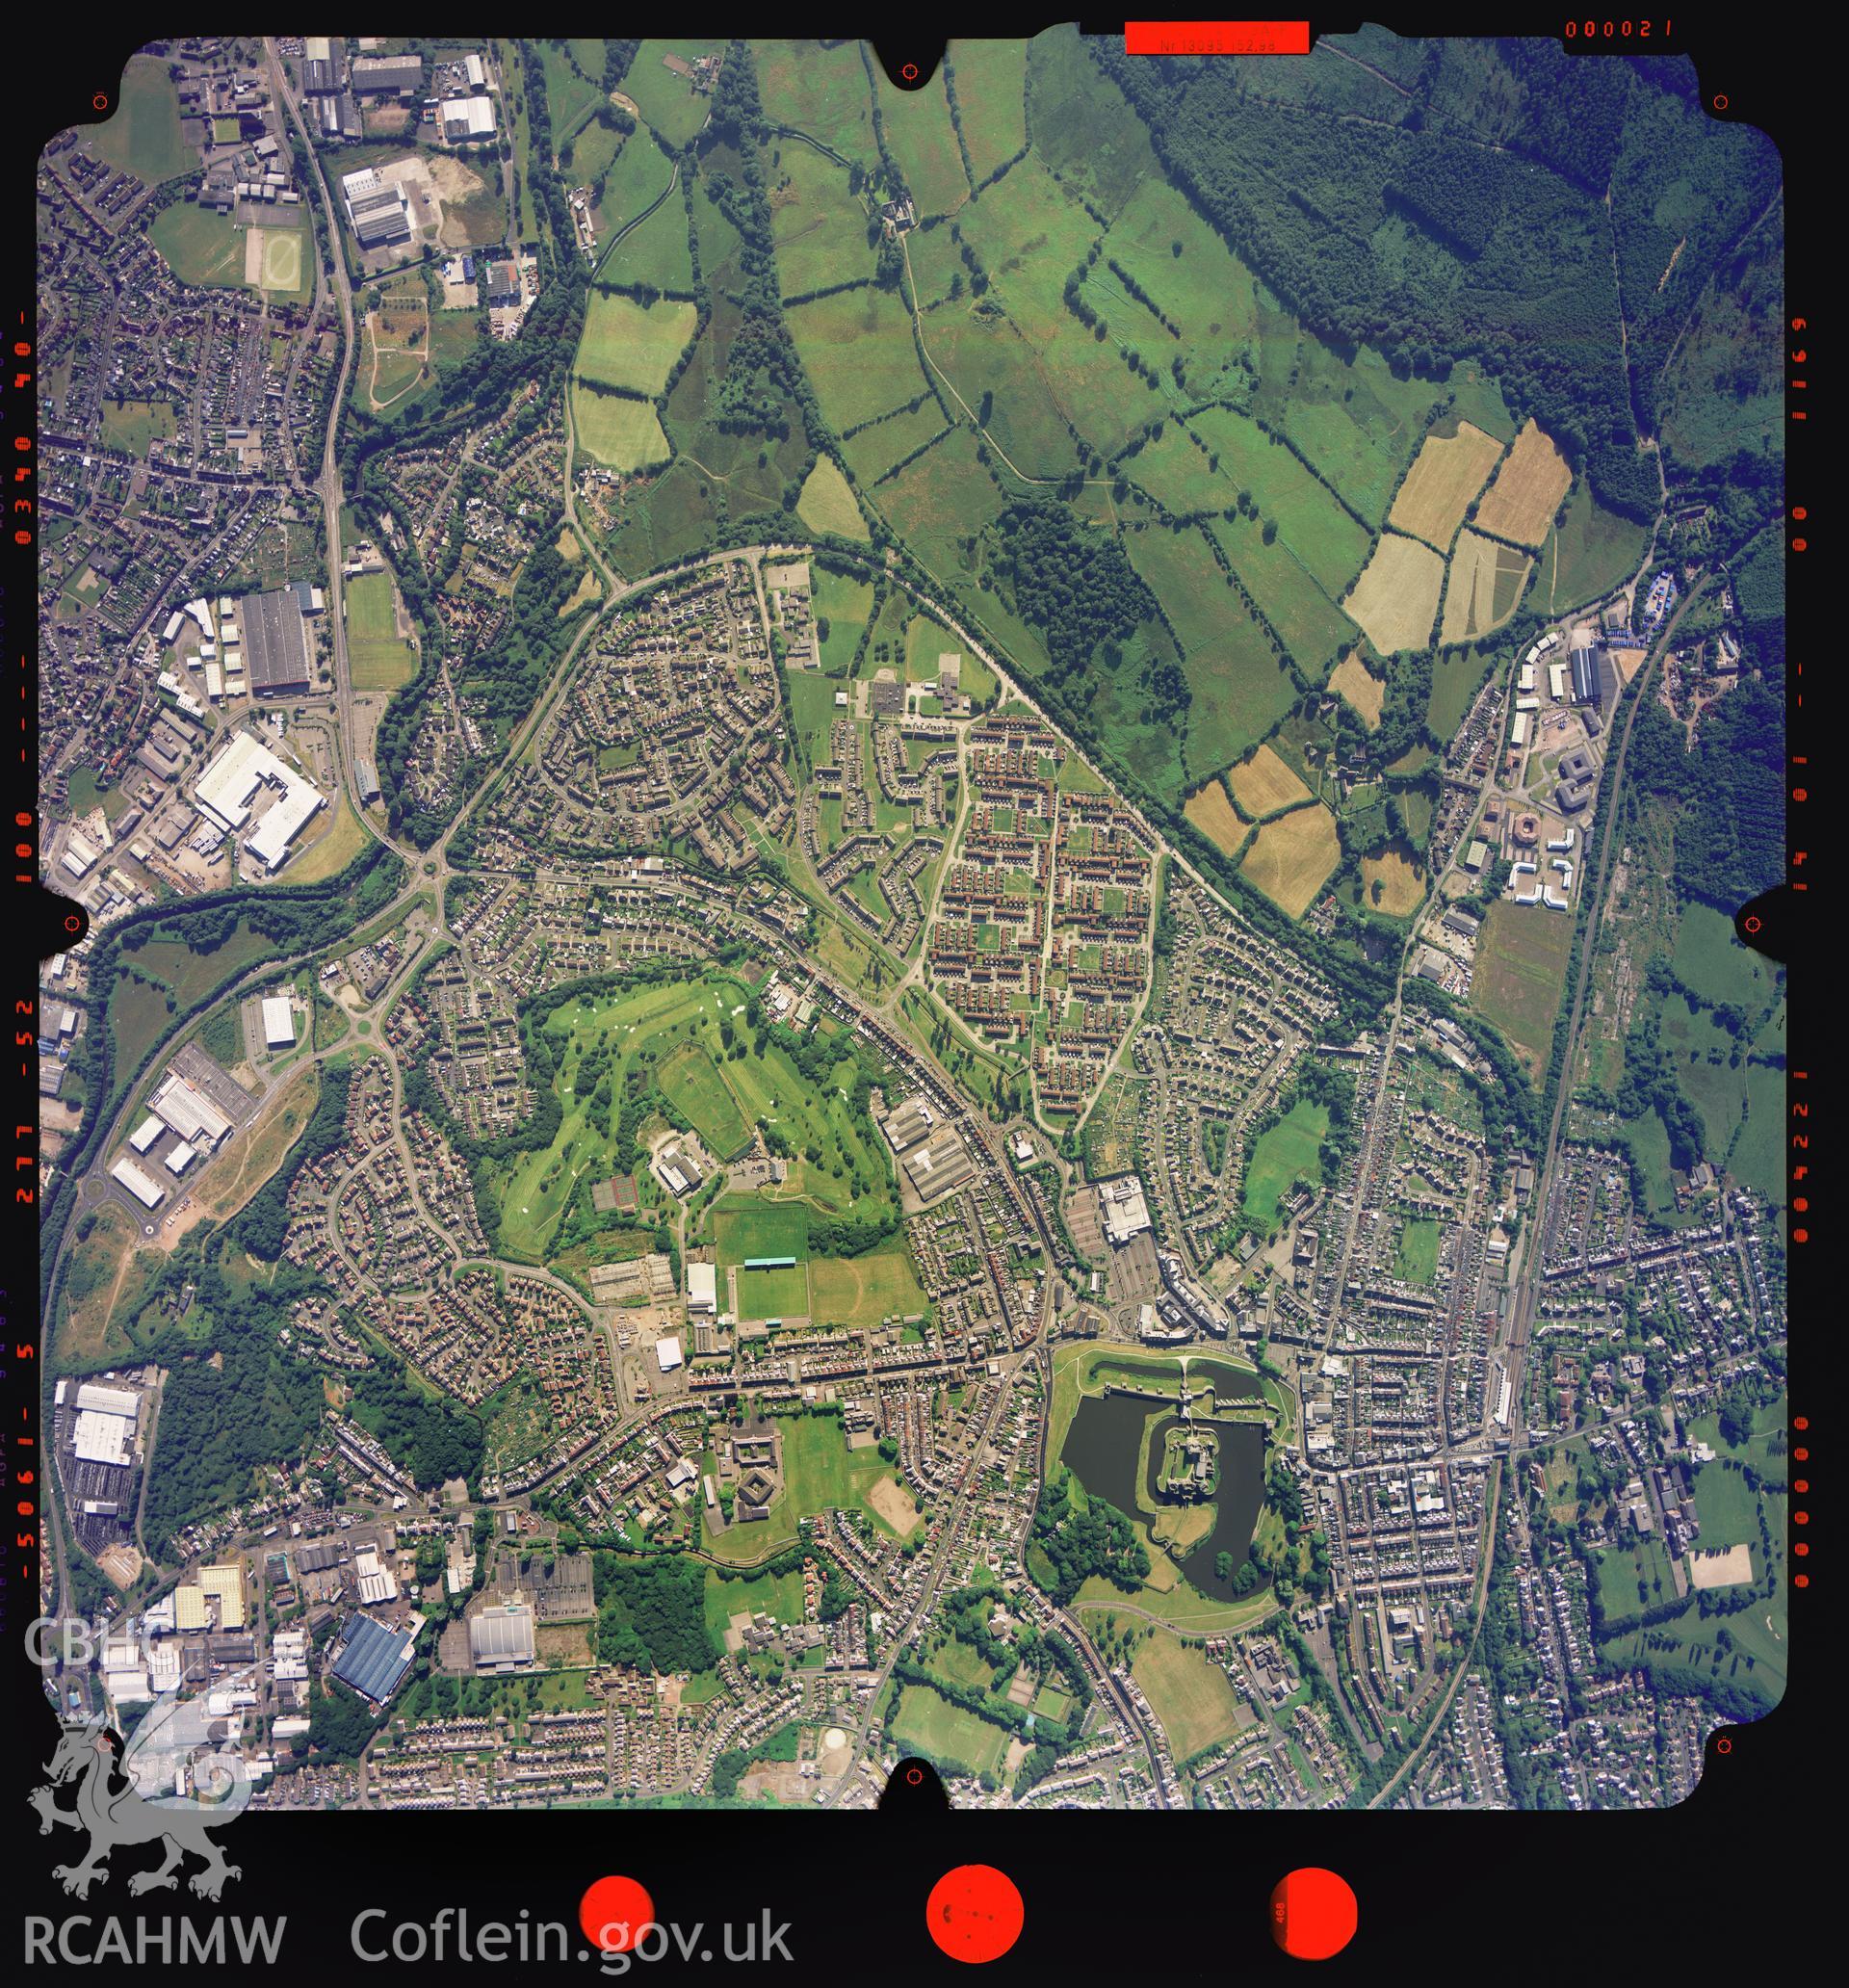 Digitized copy of a colour aerial photograph showing the area around Van, Caerphilly, taken by Ordnance Survey, 2003.